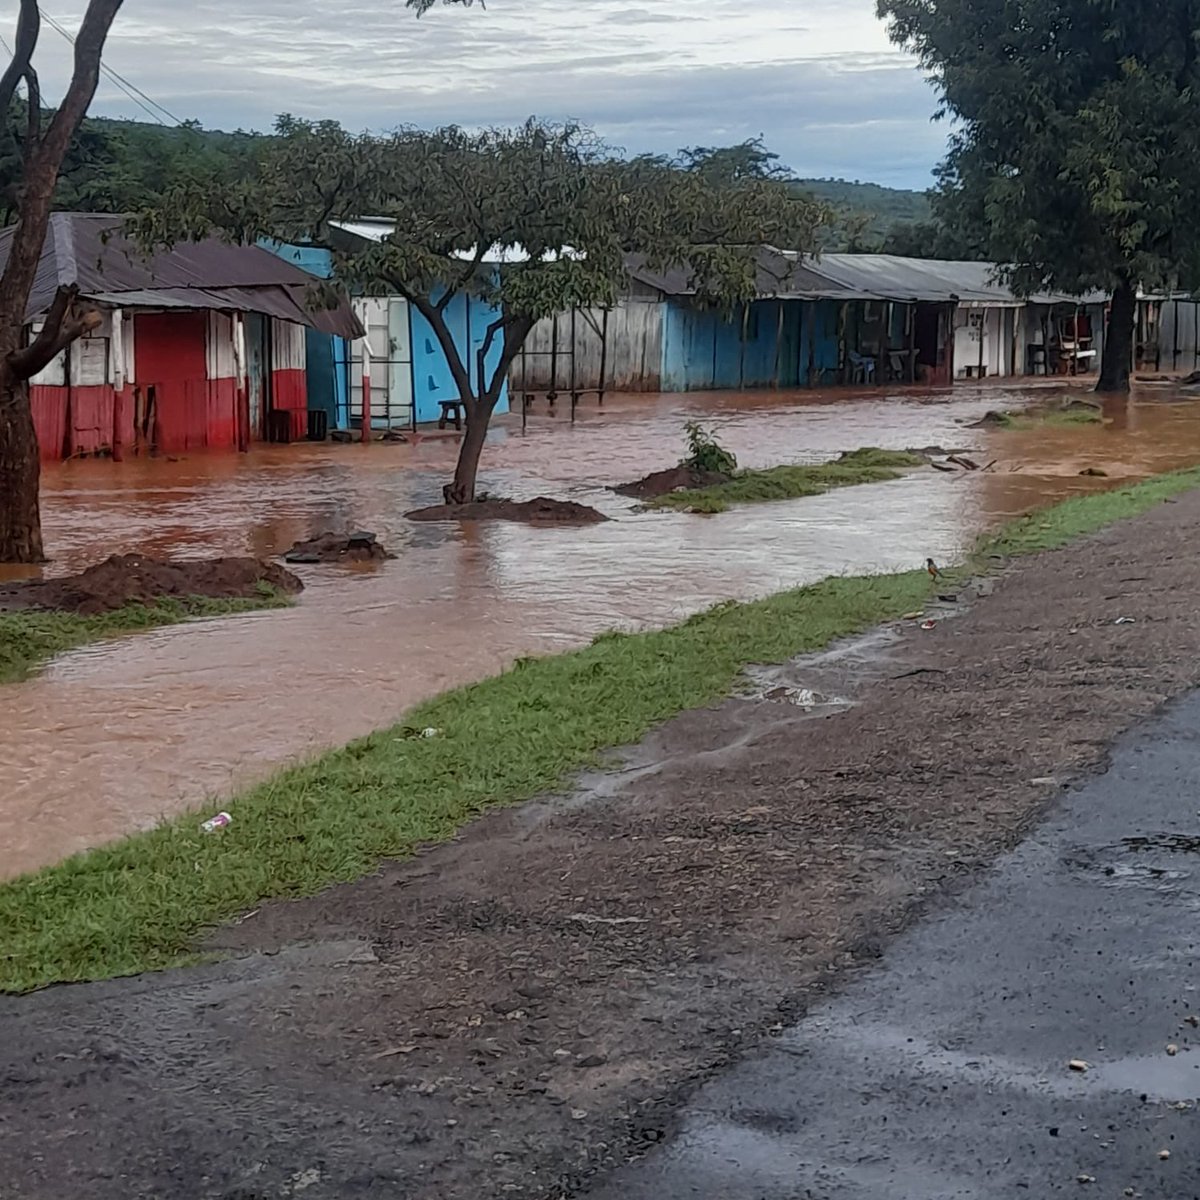 Muserechi trading centre in Eldama Ravine flooded following heavy rainfall in the area.